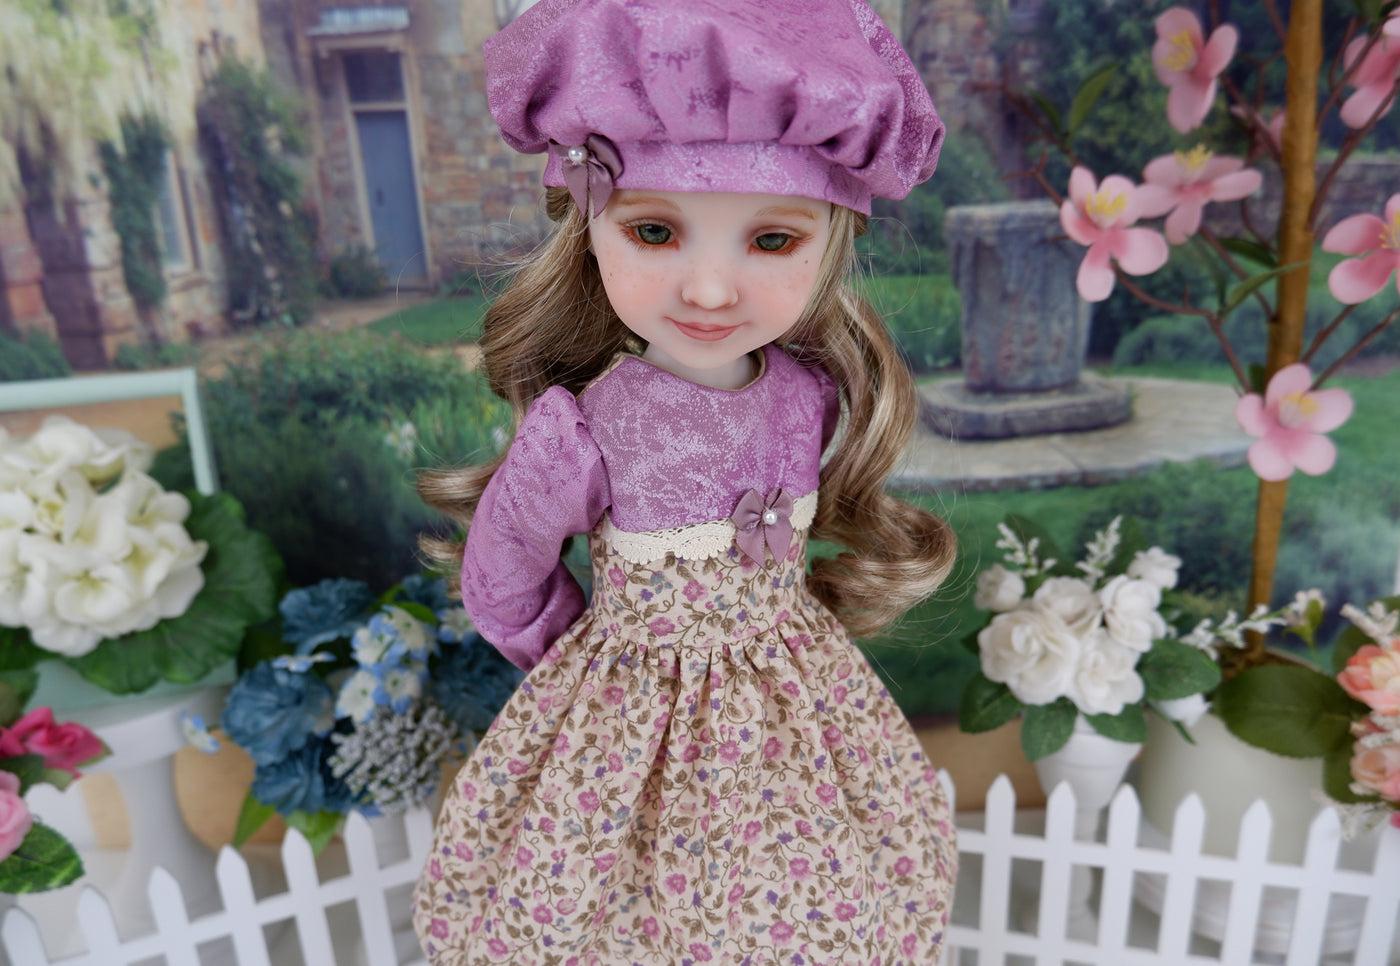 Lilac Glories - dress and shoes for Ruby Red Fashion Friends doll